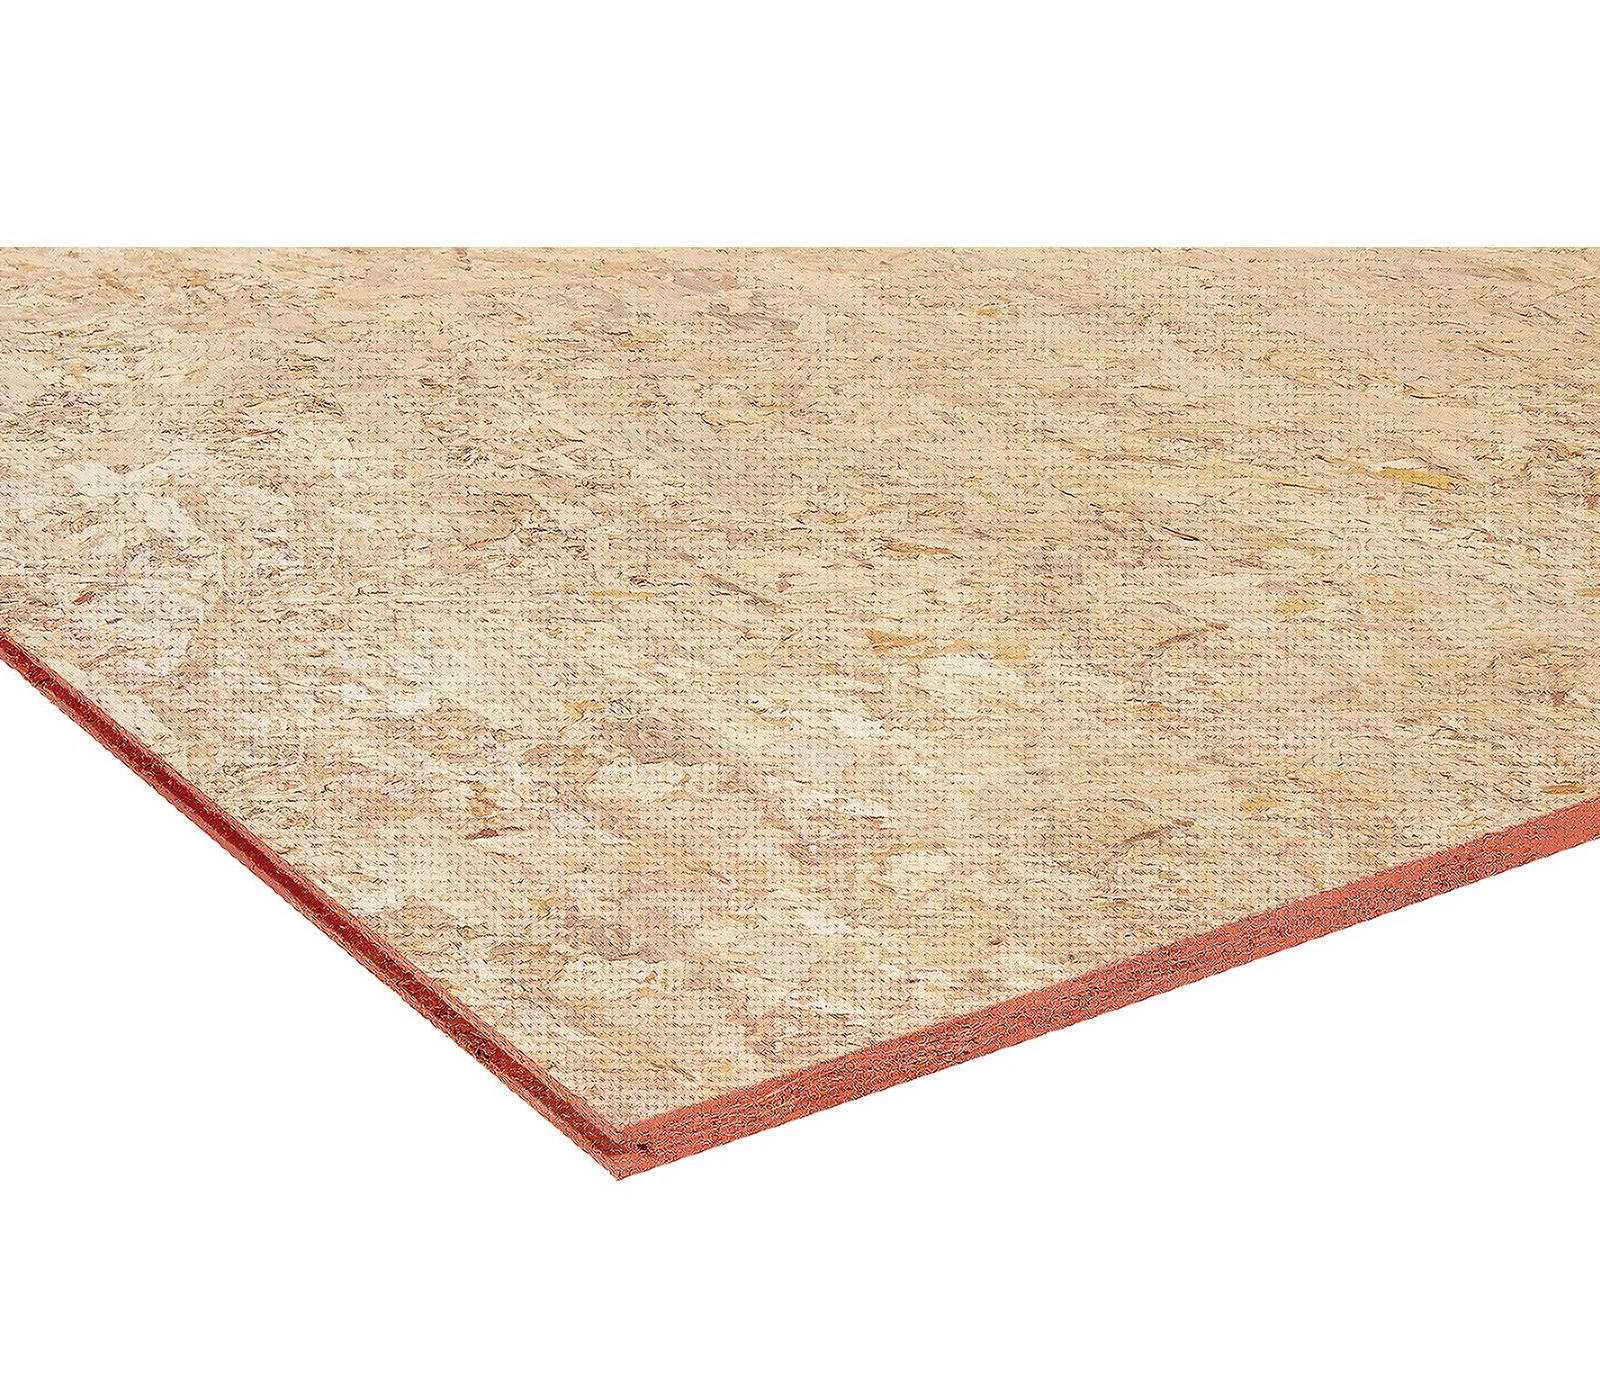 An Oriented Strand Board